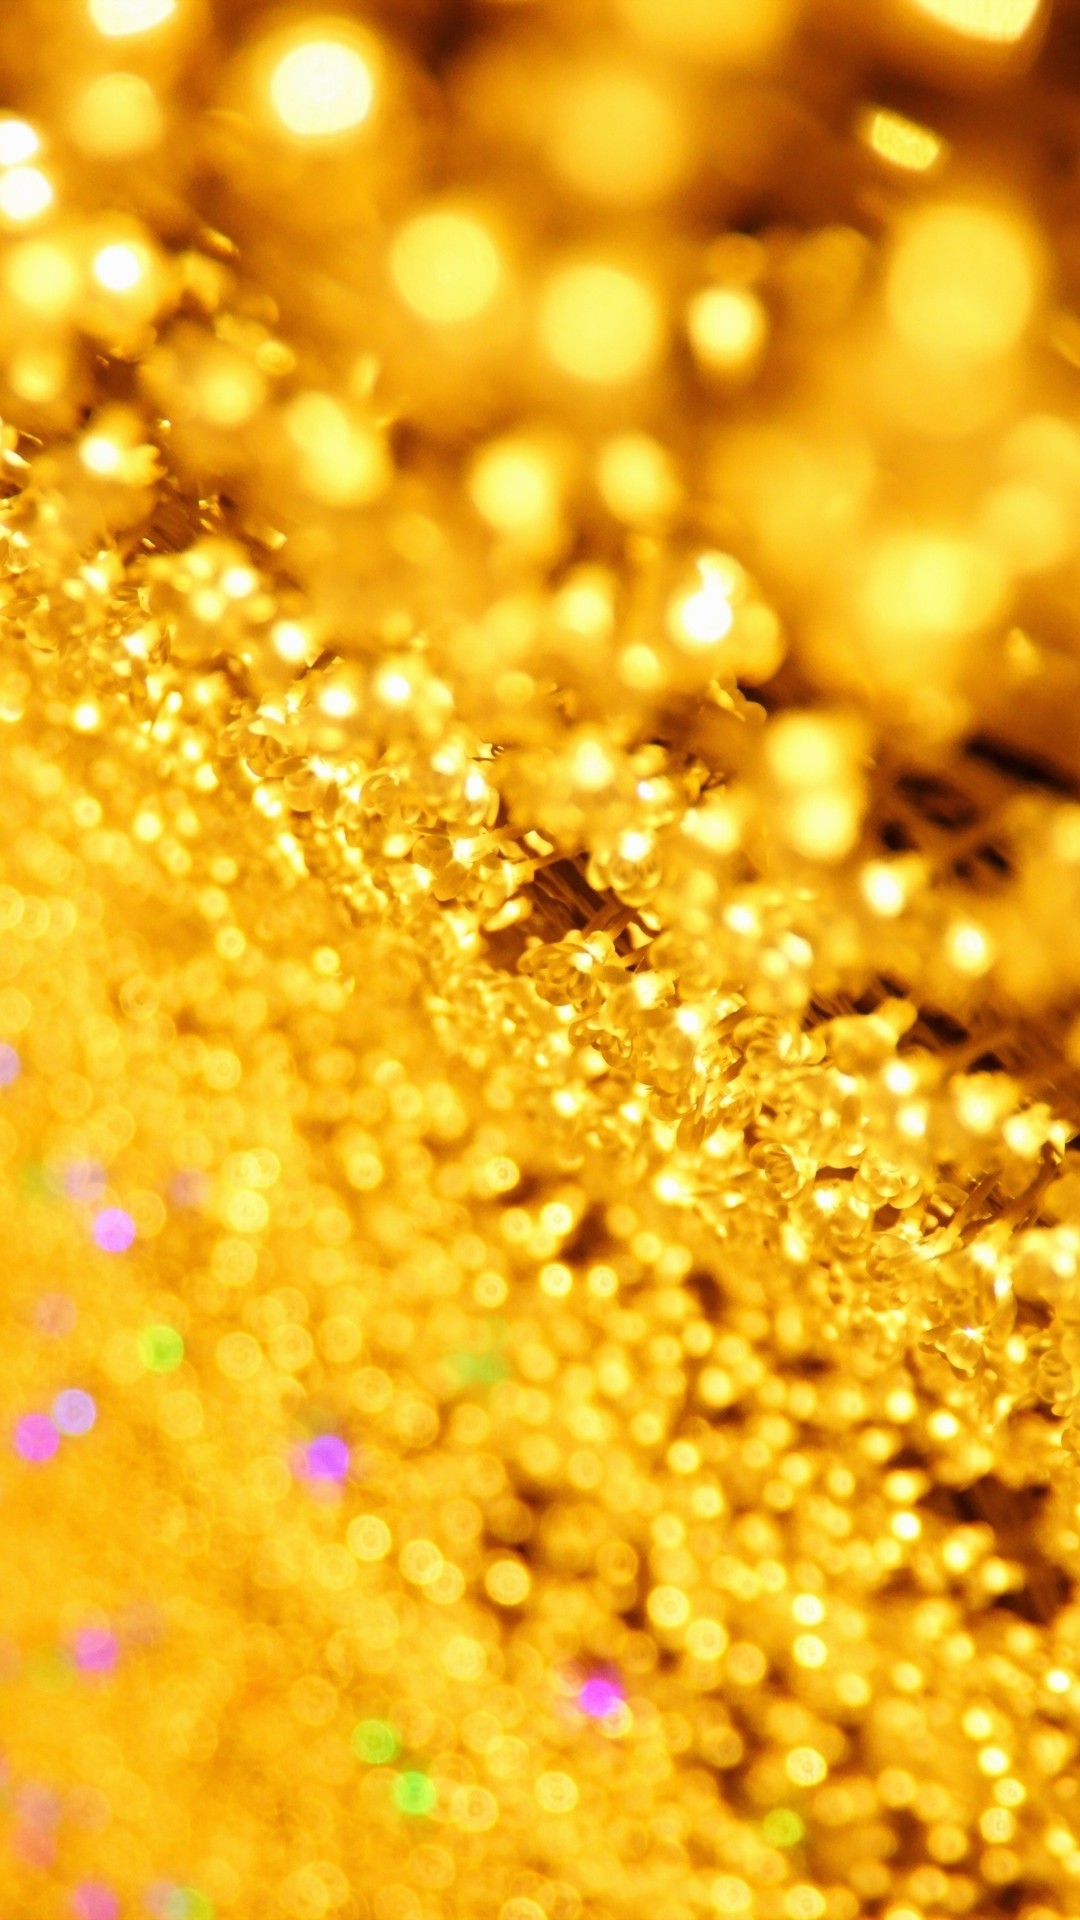 Wallpapers Gold Sparkle with HD resolution 1080x1920